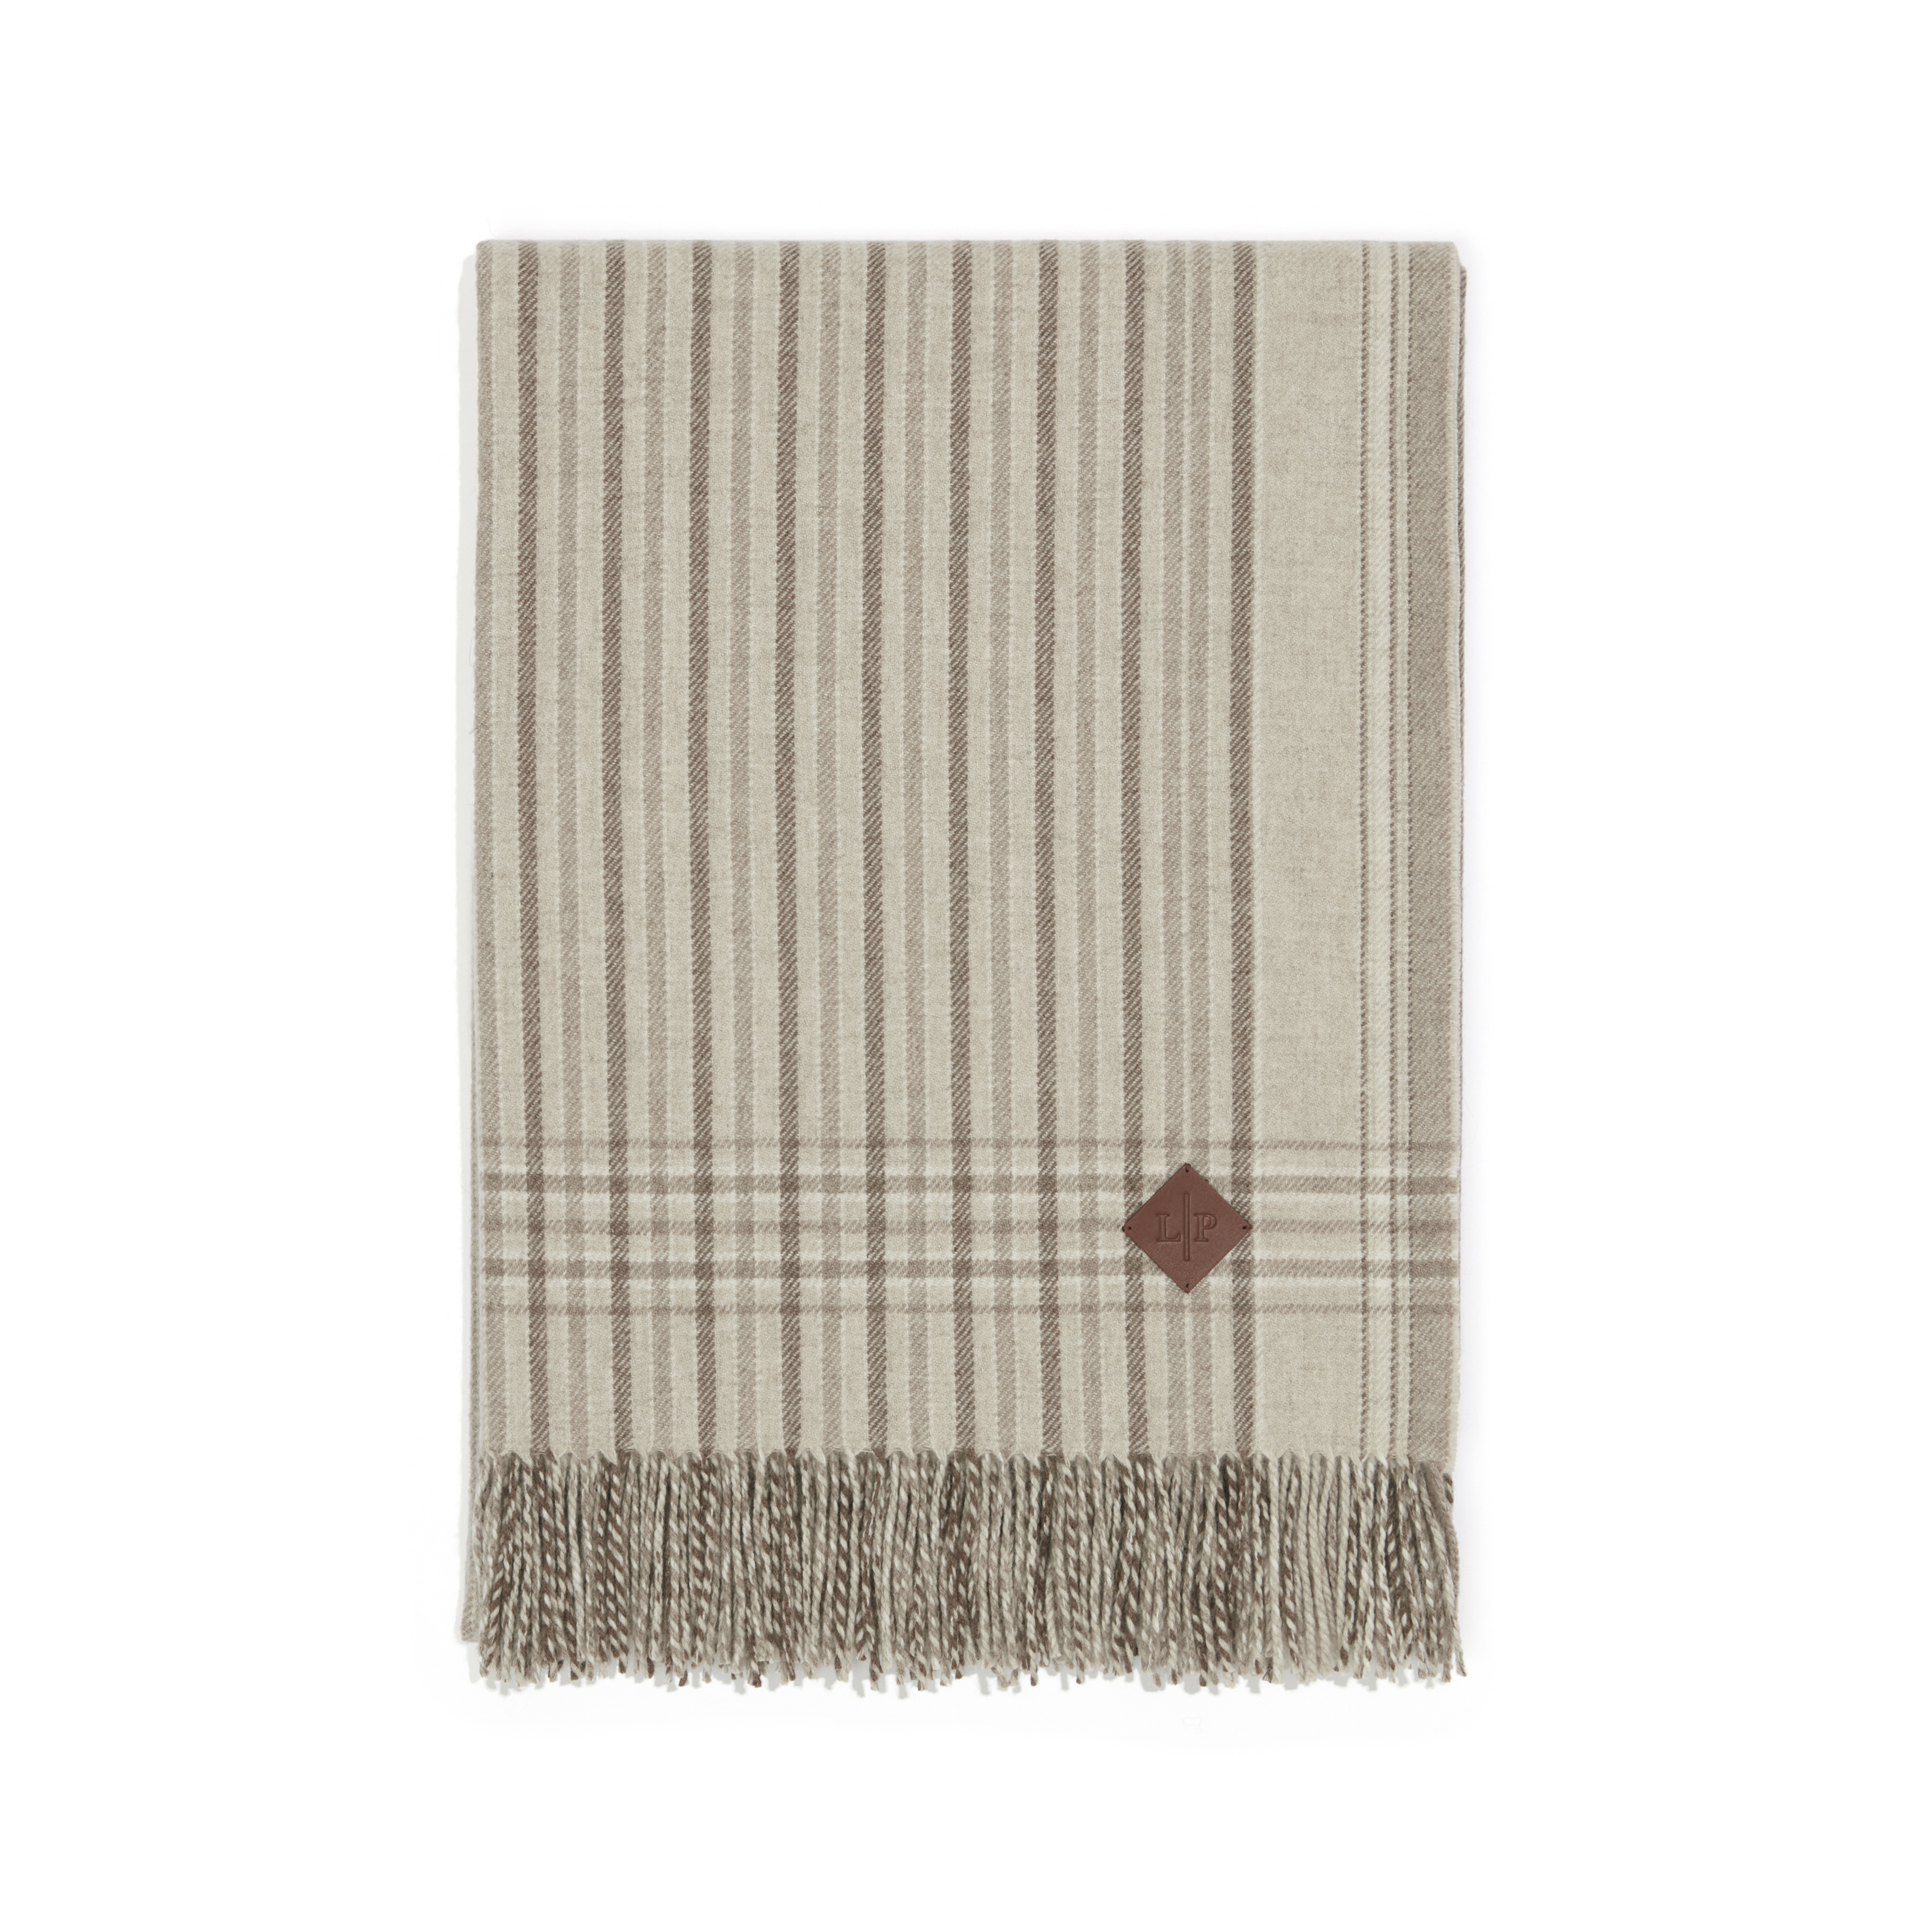 Loro Piana plaid turkana cashmere throw in cream with beige and white lines and checks with fringe